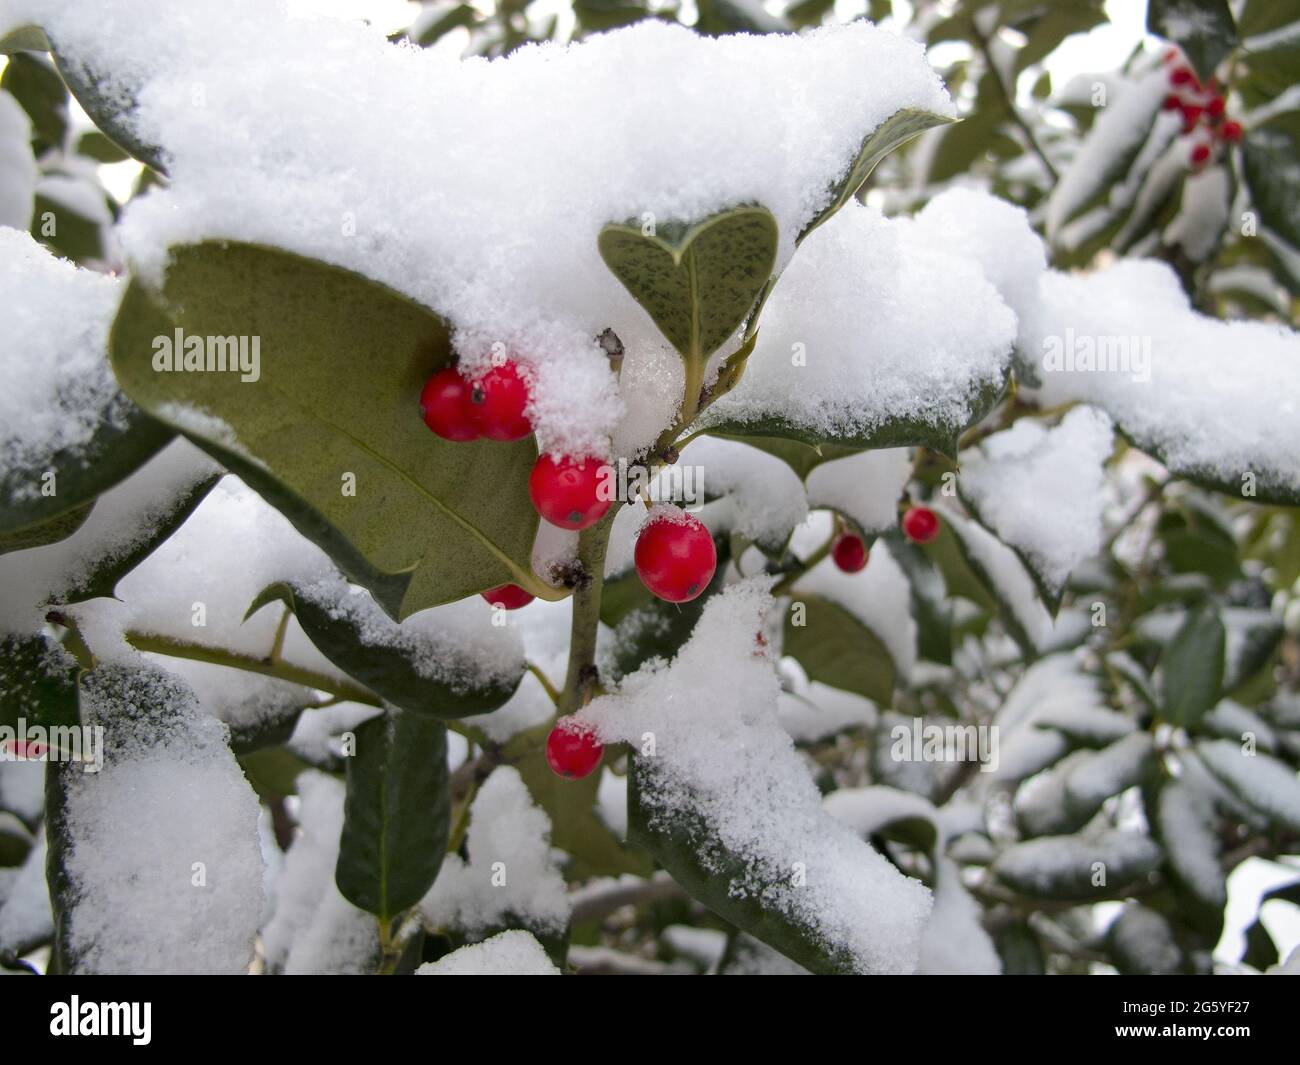 Brightly colored holly berries pop against the white snow. Stock Photo